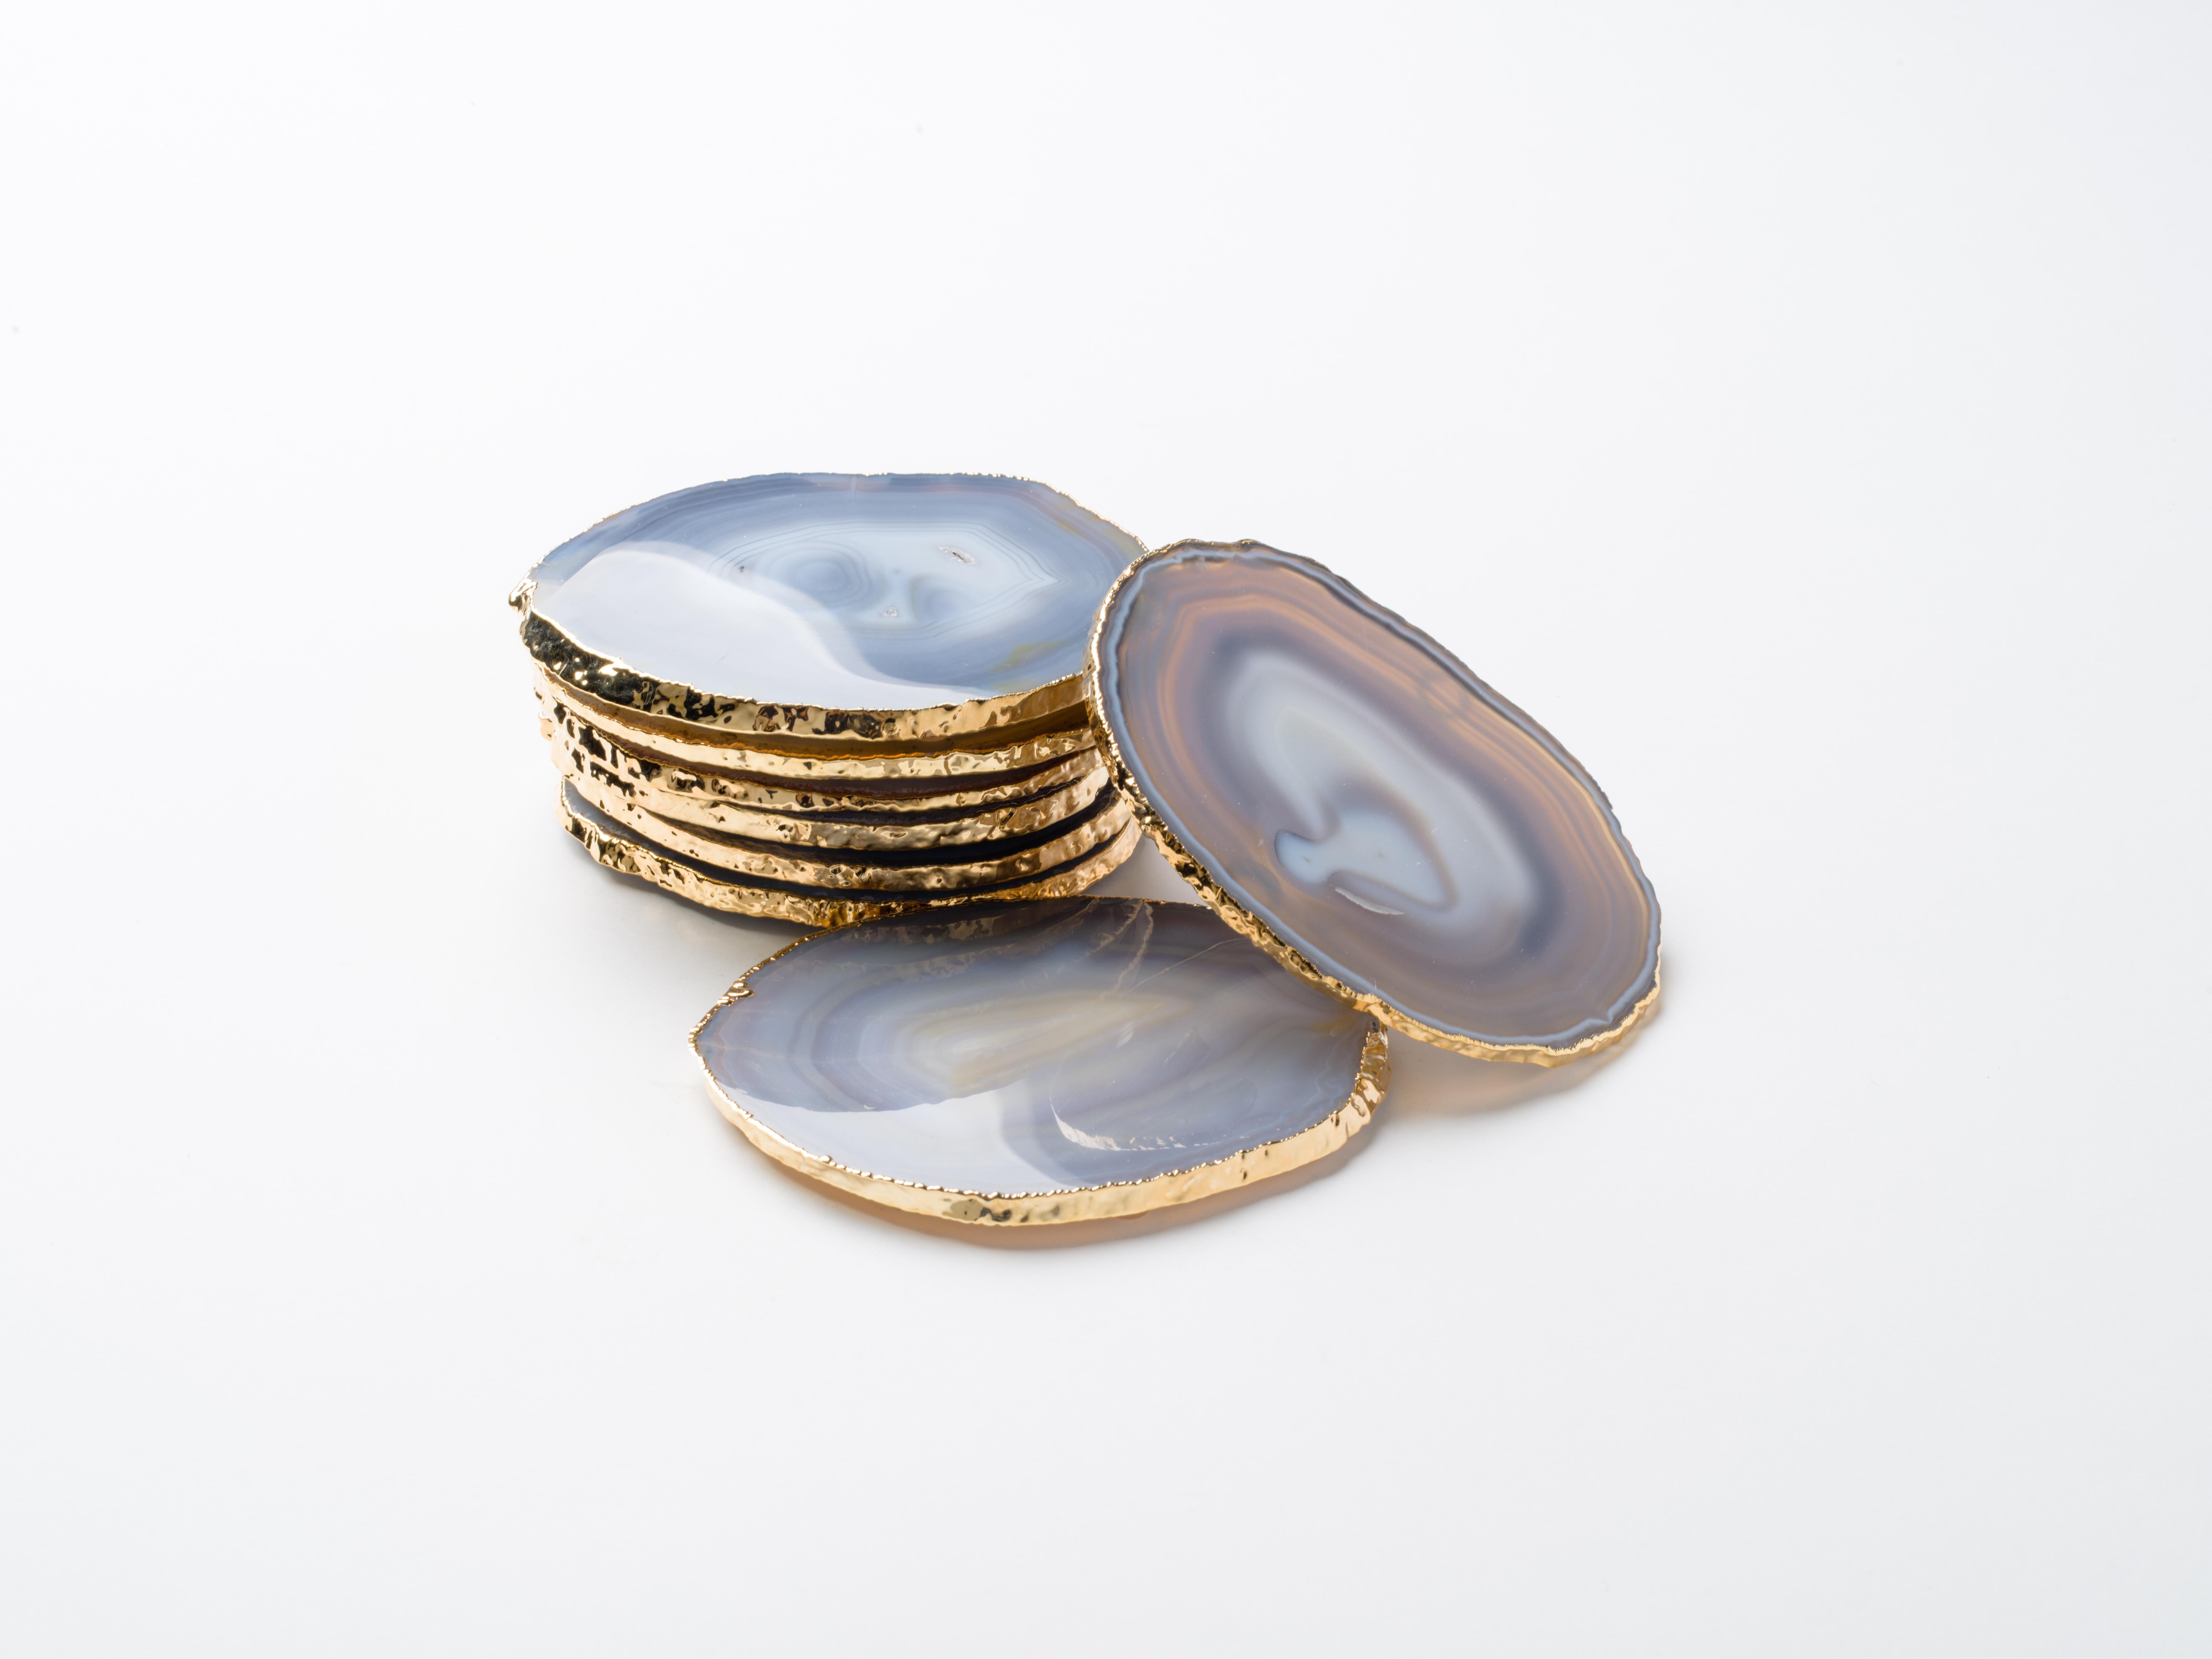 Stunning natural agate and crystal coasters with 24-karat gold-plated edges. Three color variations are available: Teal, onyx or grey. Polished fronts and natural rough edges. No two pieces are alike. Make beautiful accessories to any coffee table